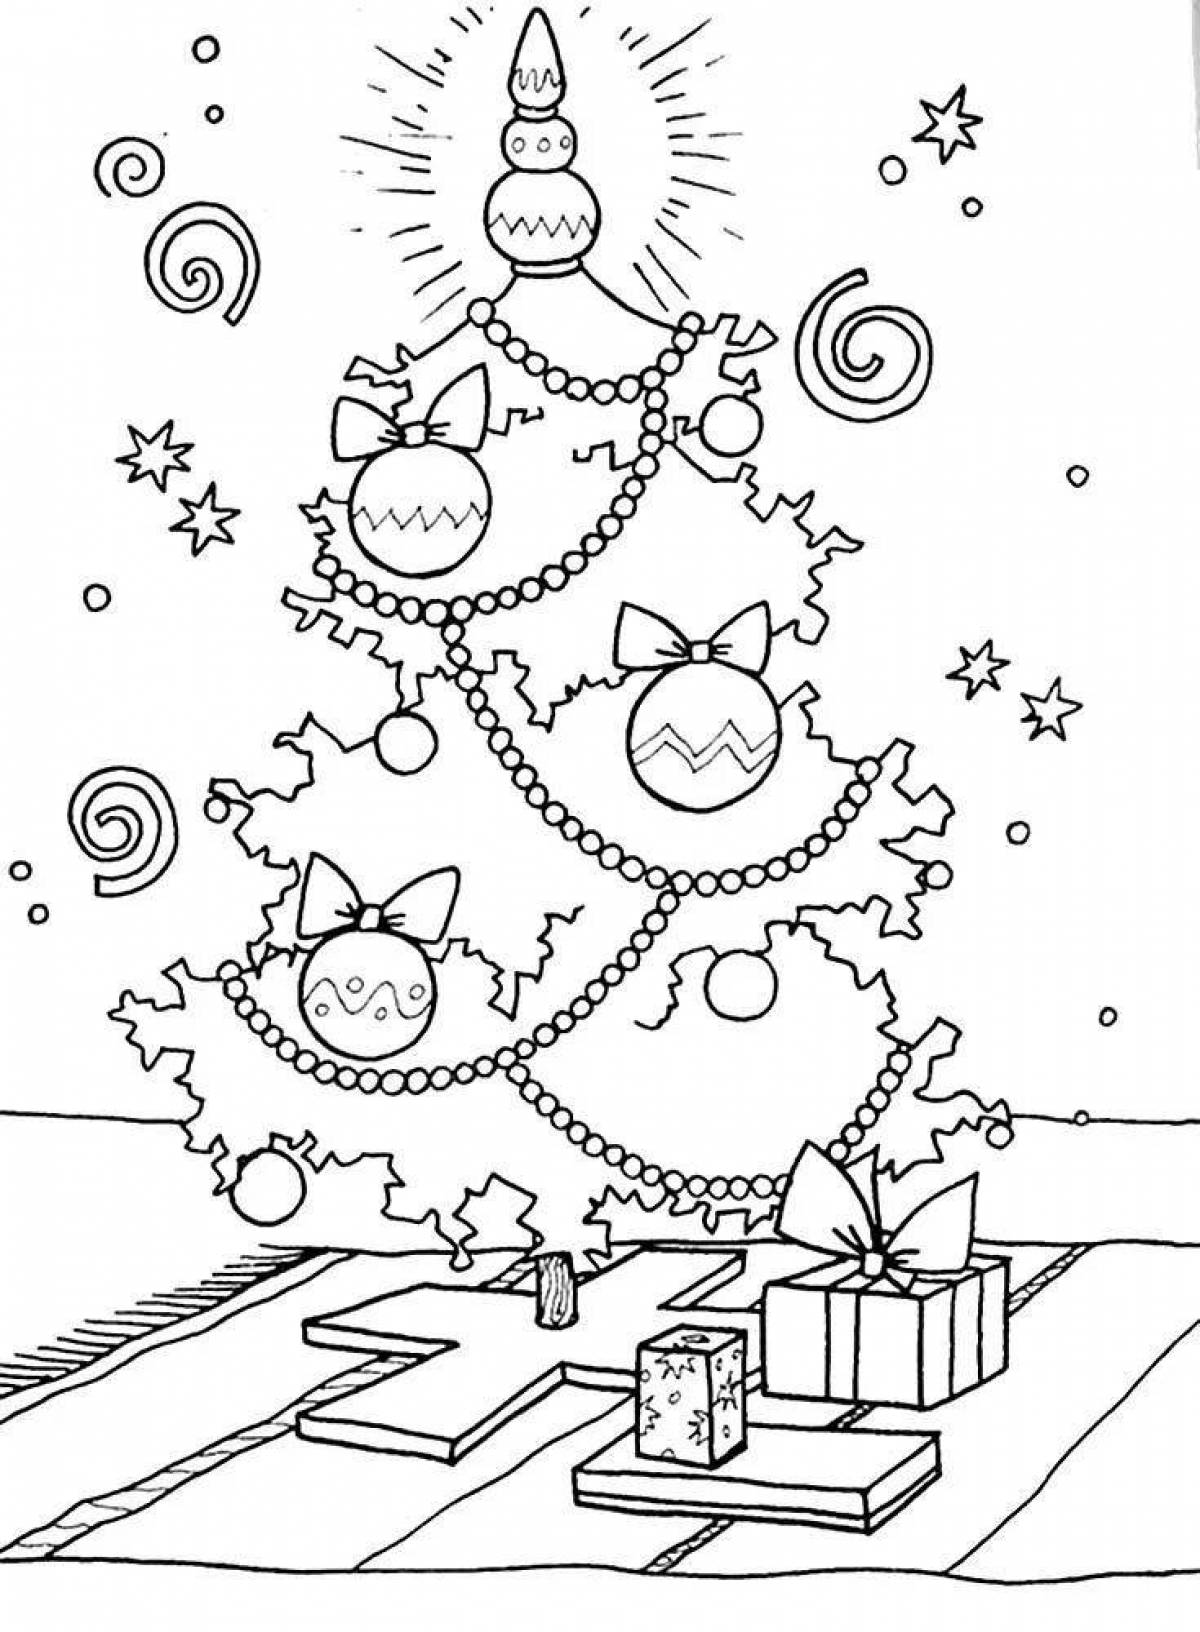 Blooming Christmas coloring book